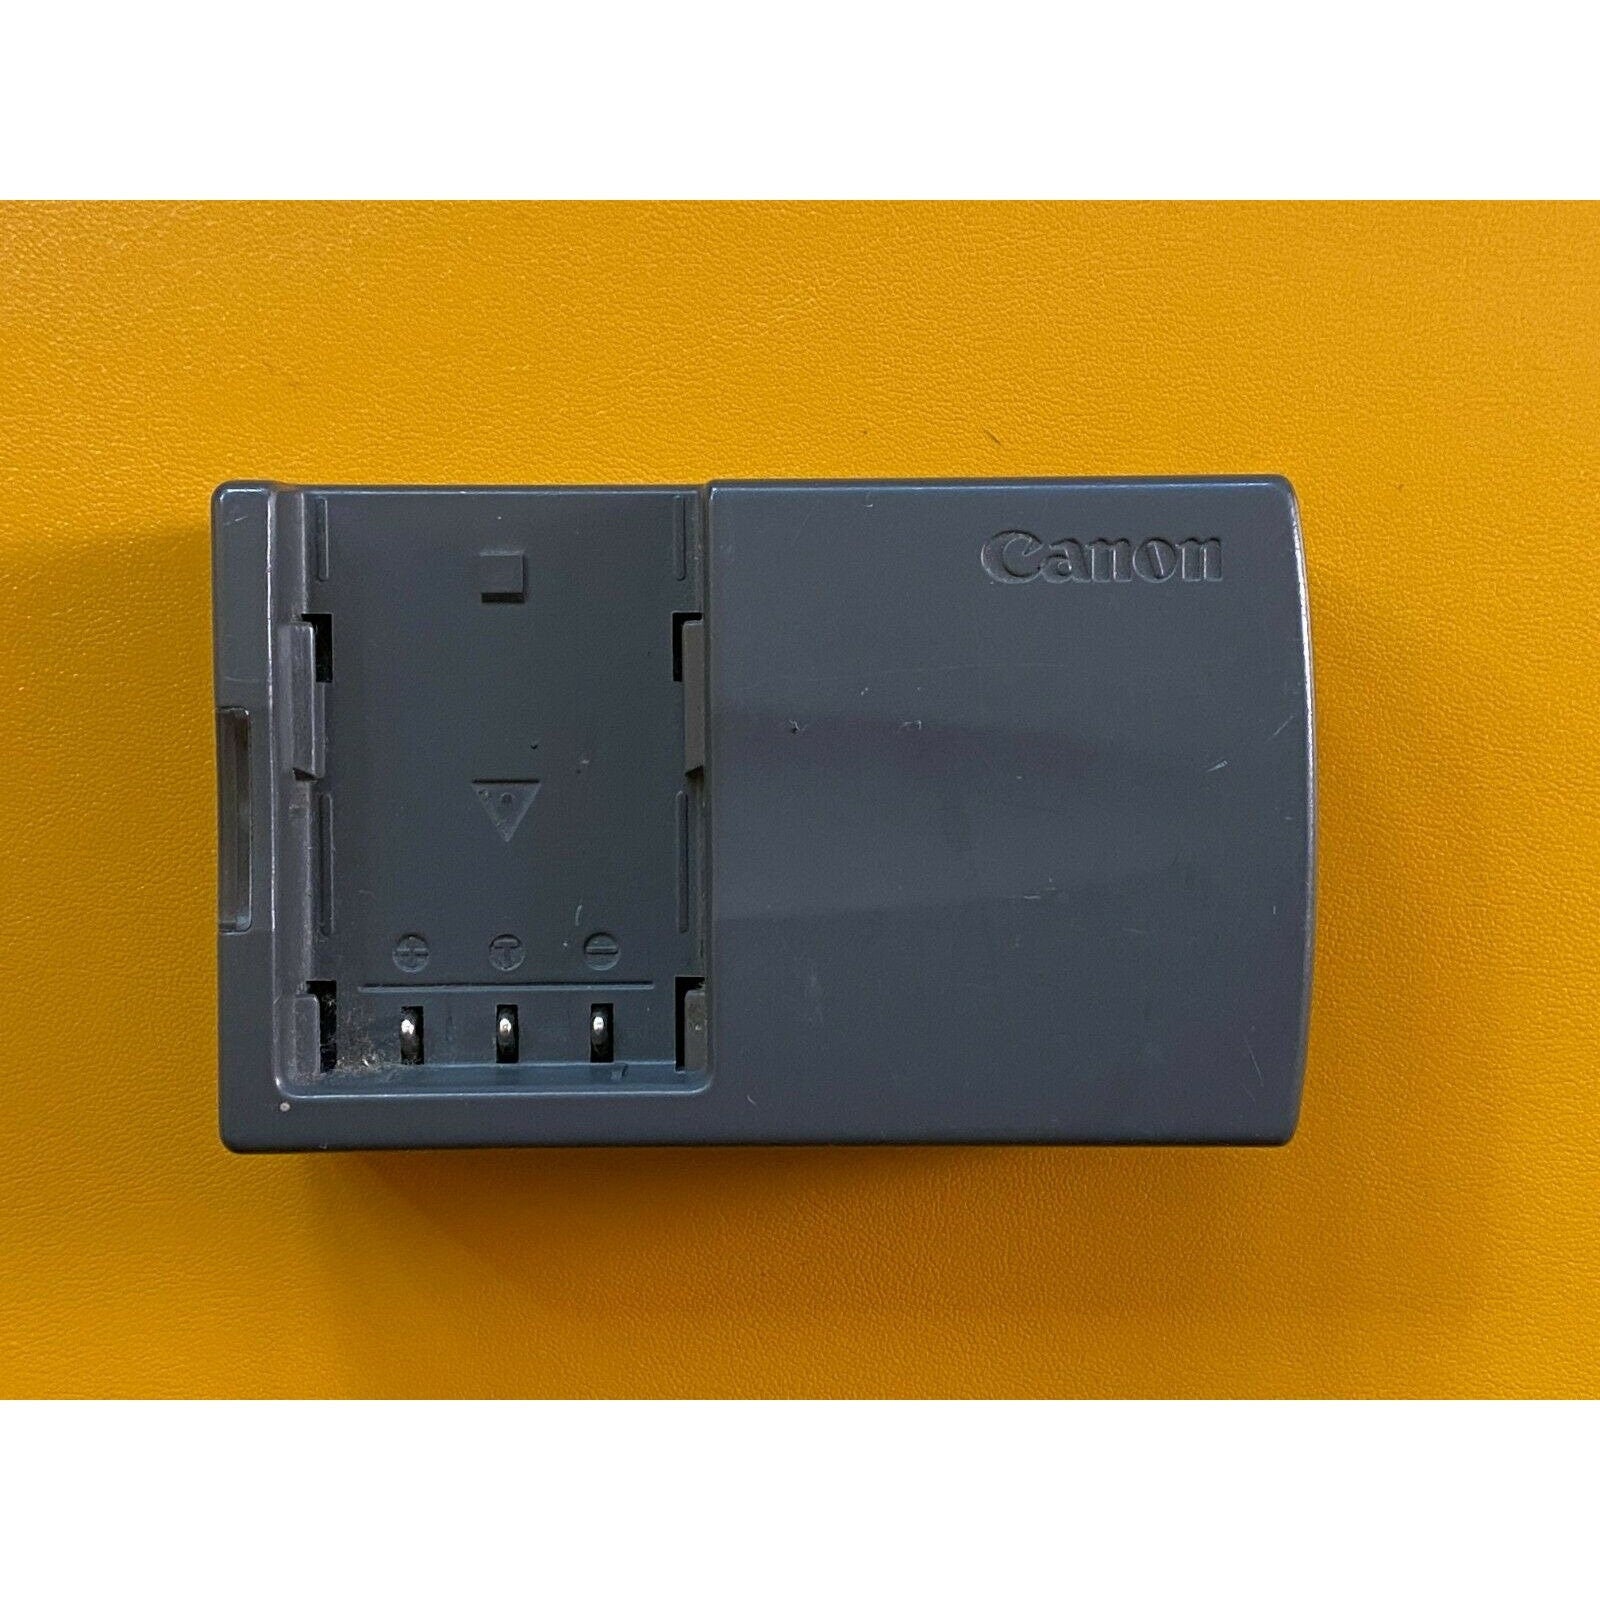 Canon CB-2LT Battery Charger Power For Canon Digital Camera